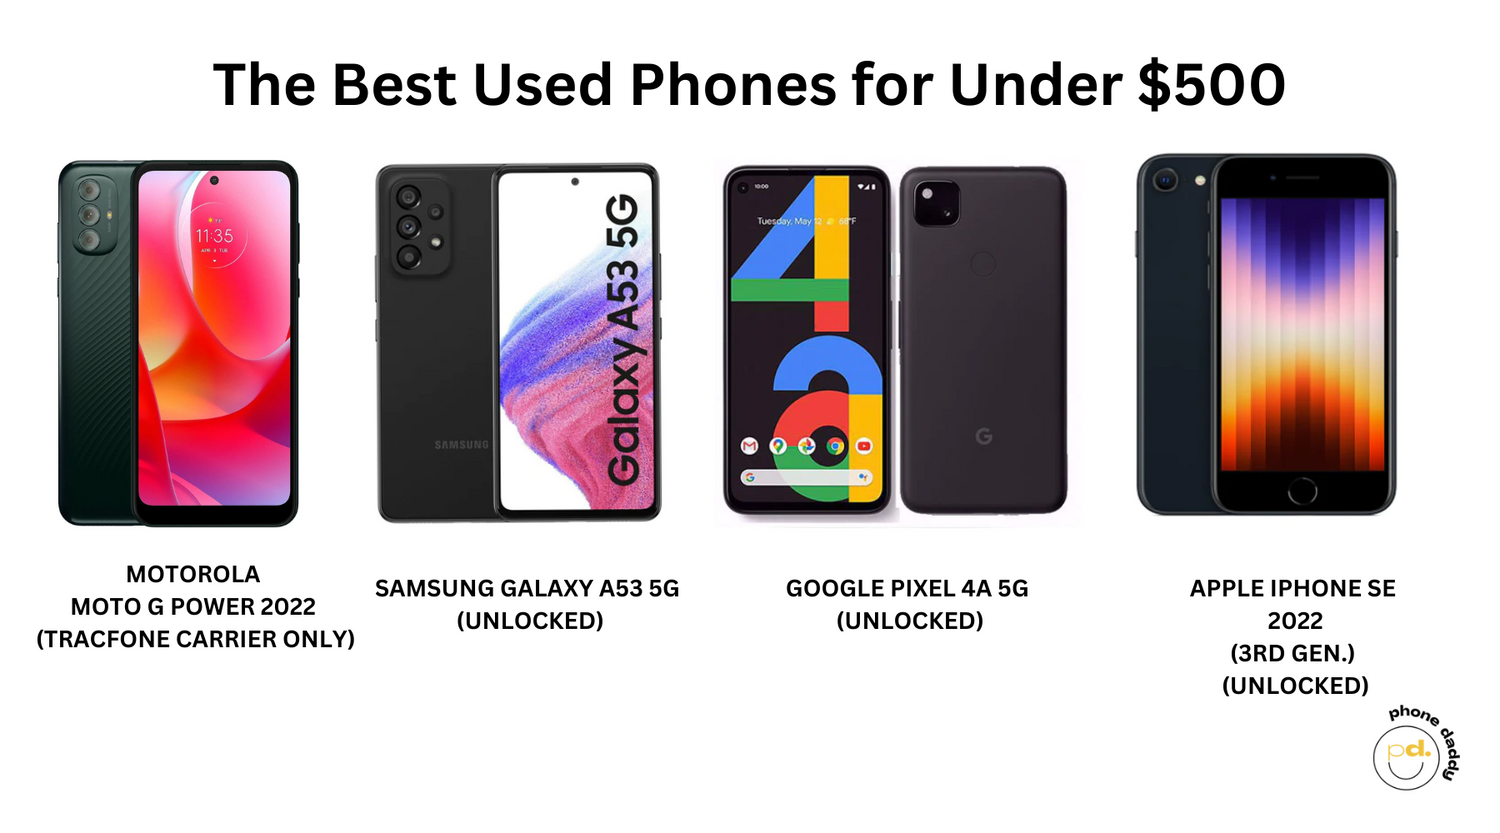 The Best Used Phones for Under $500